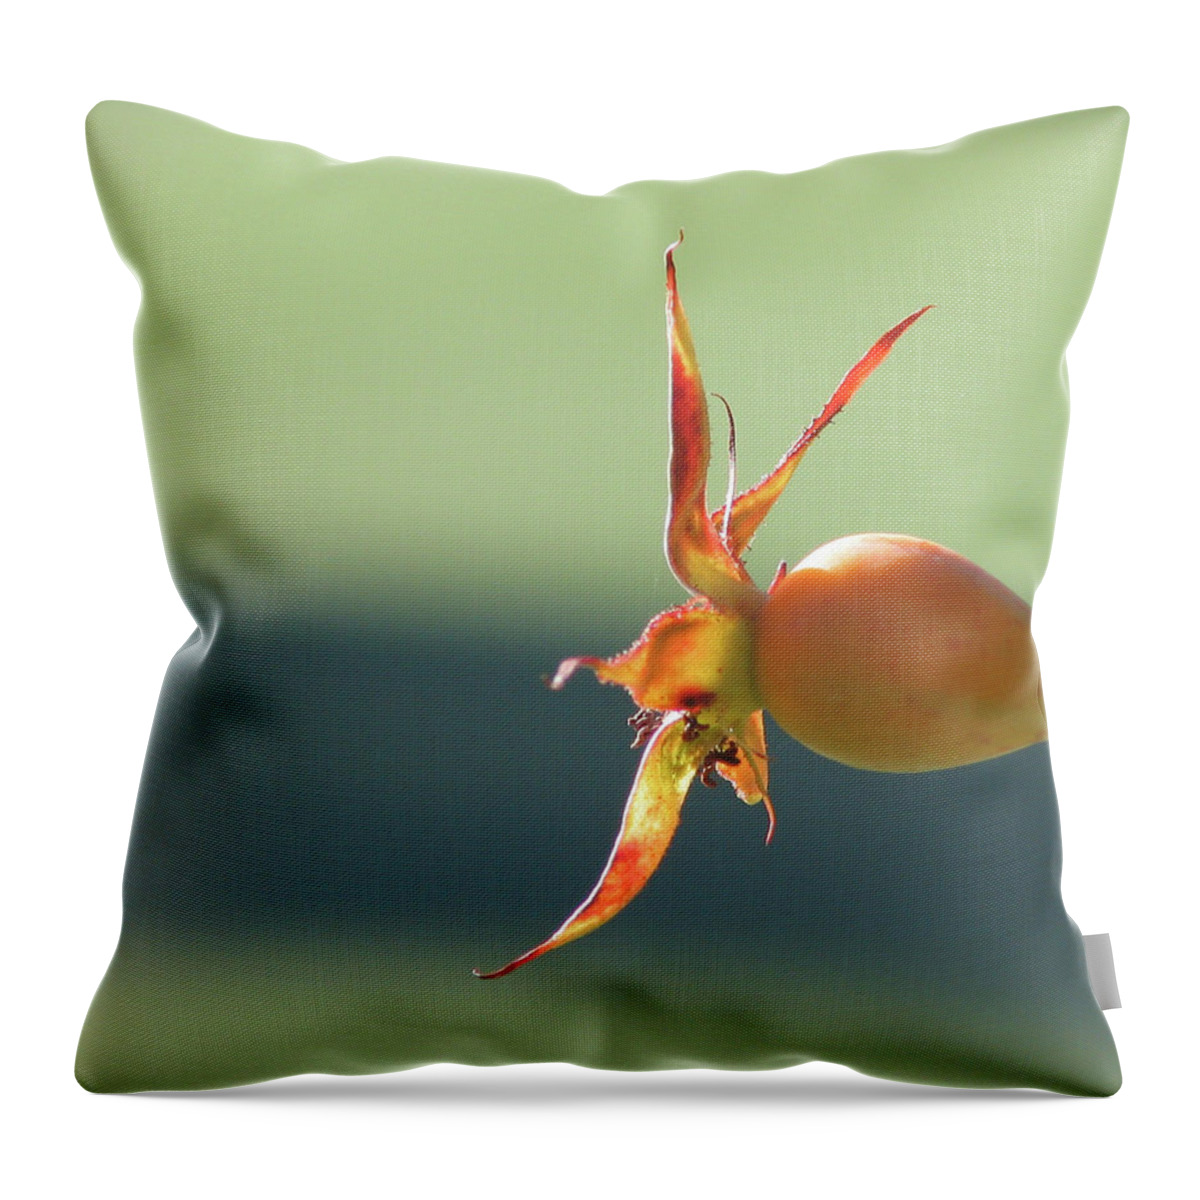 Flower Throw Pillow featuring the photograph Brilliant Seed Pod by David Bader